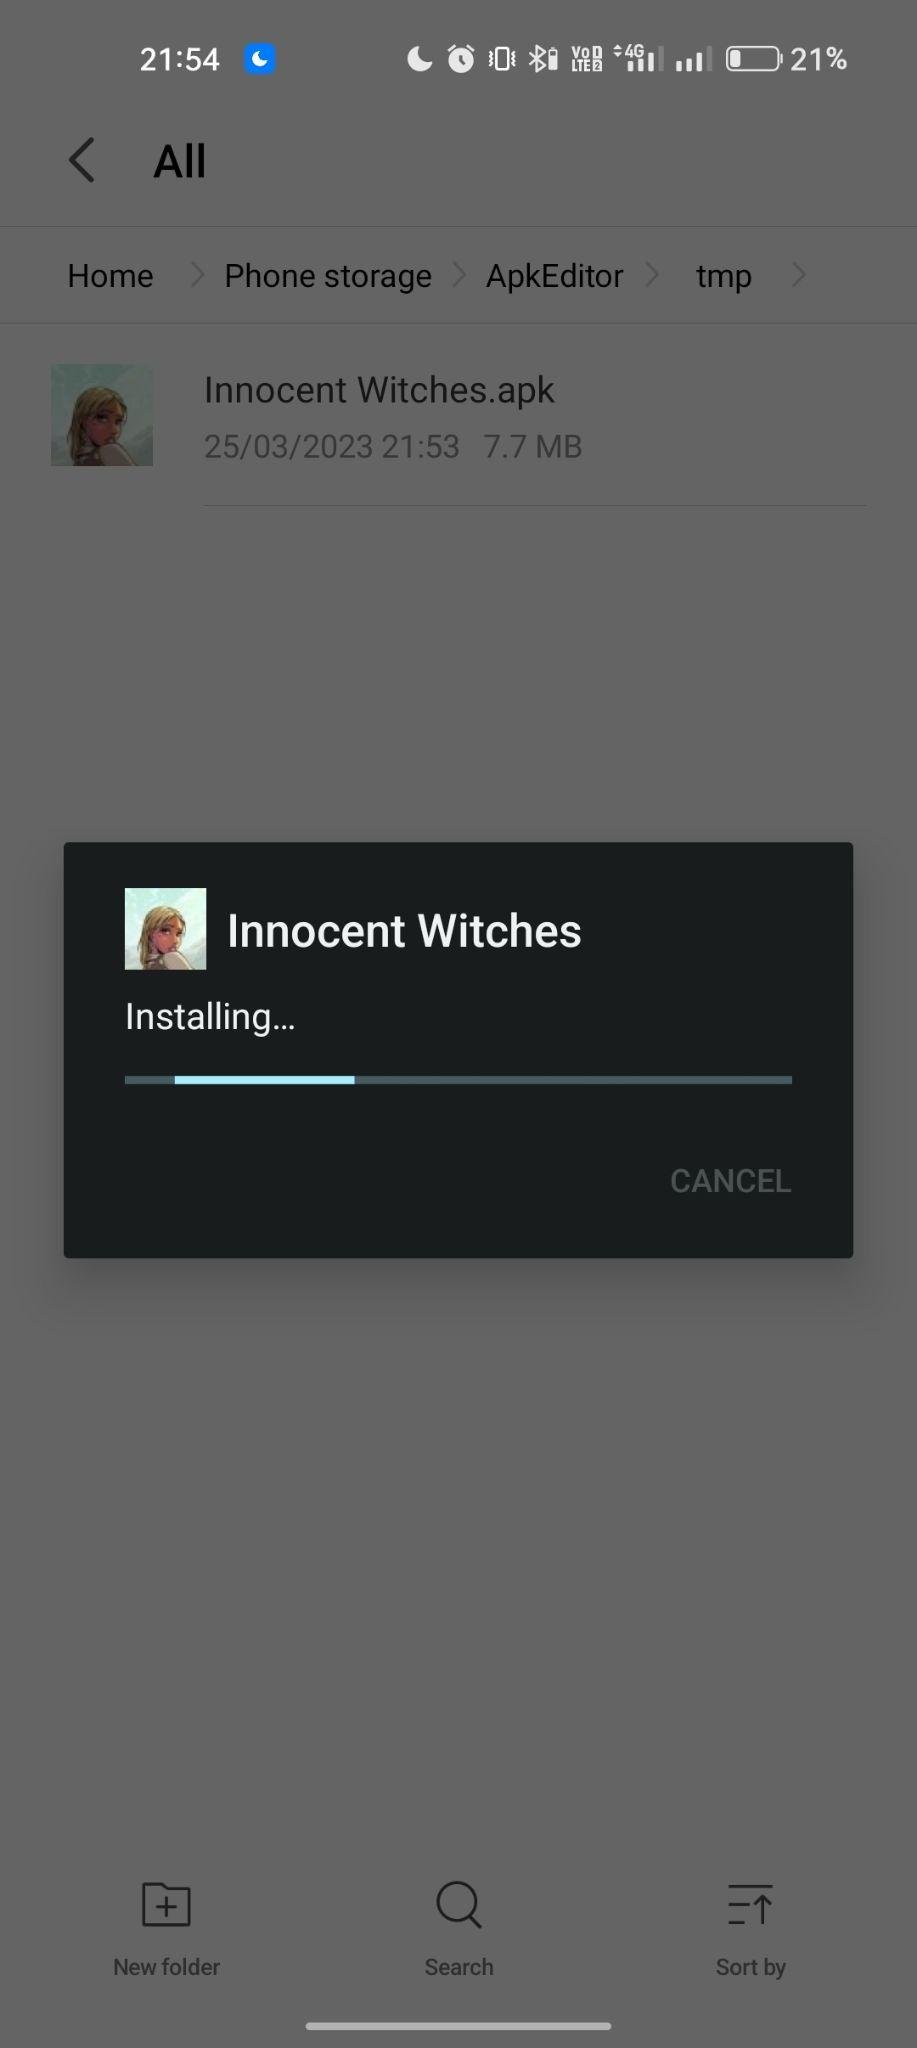 Innocent Witches apk installing